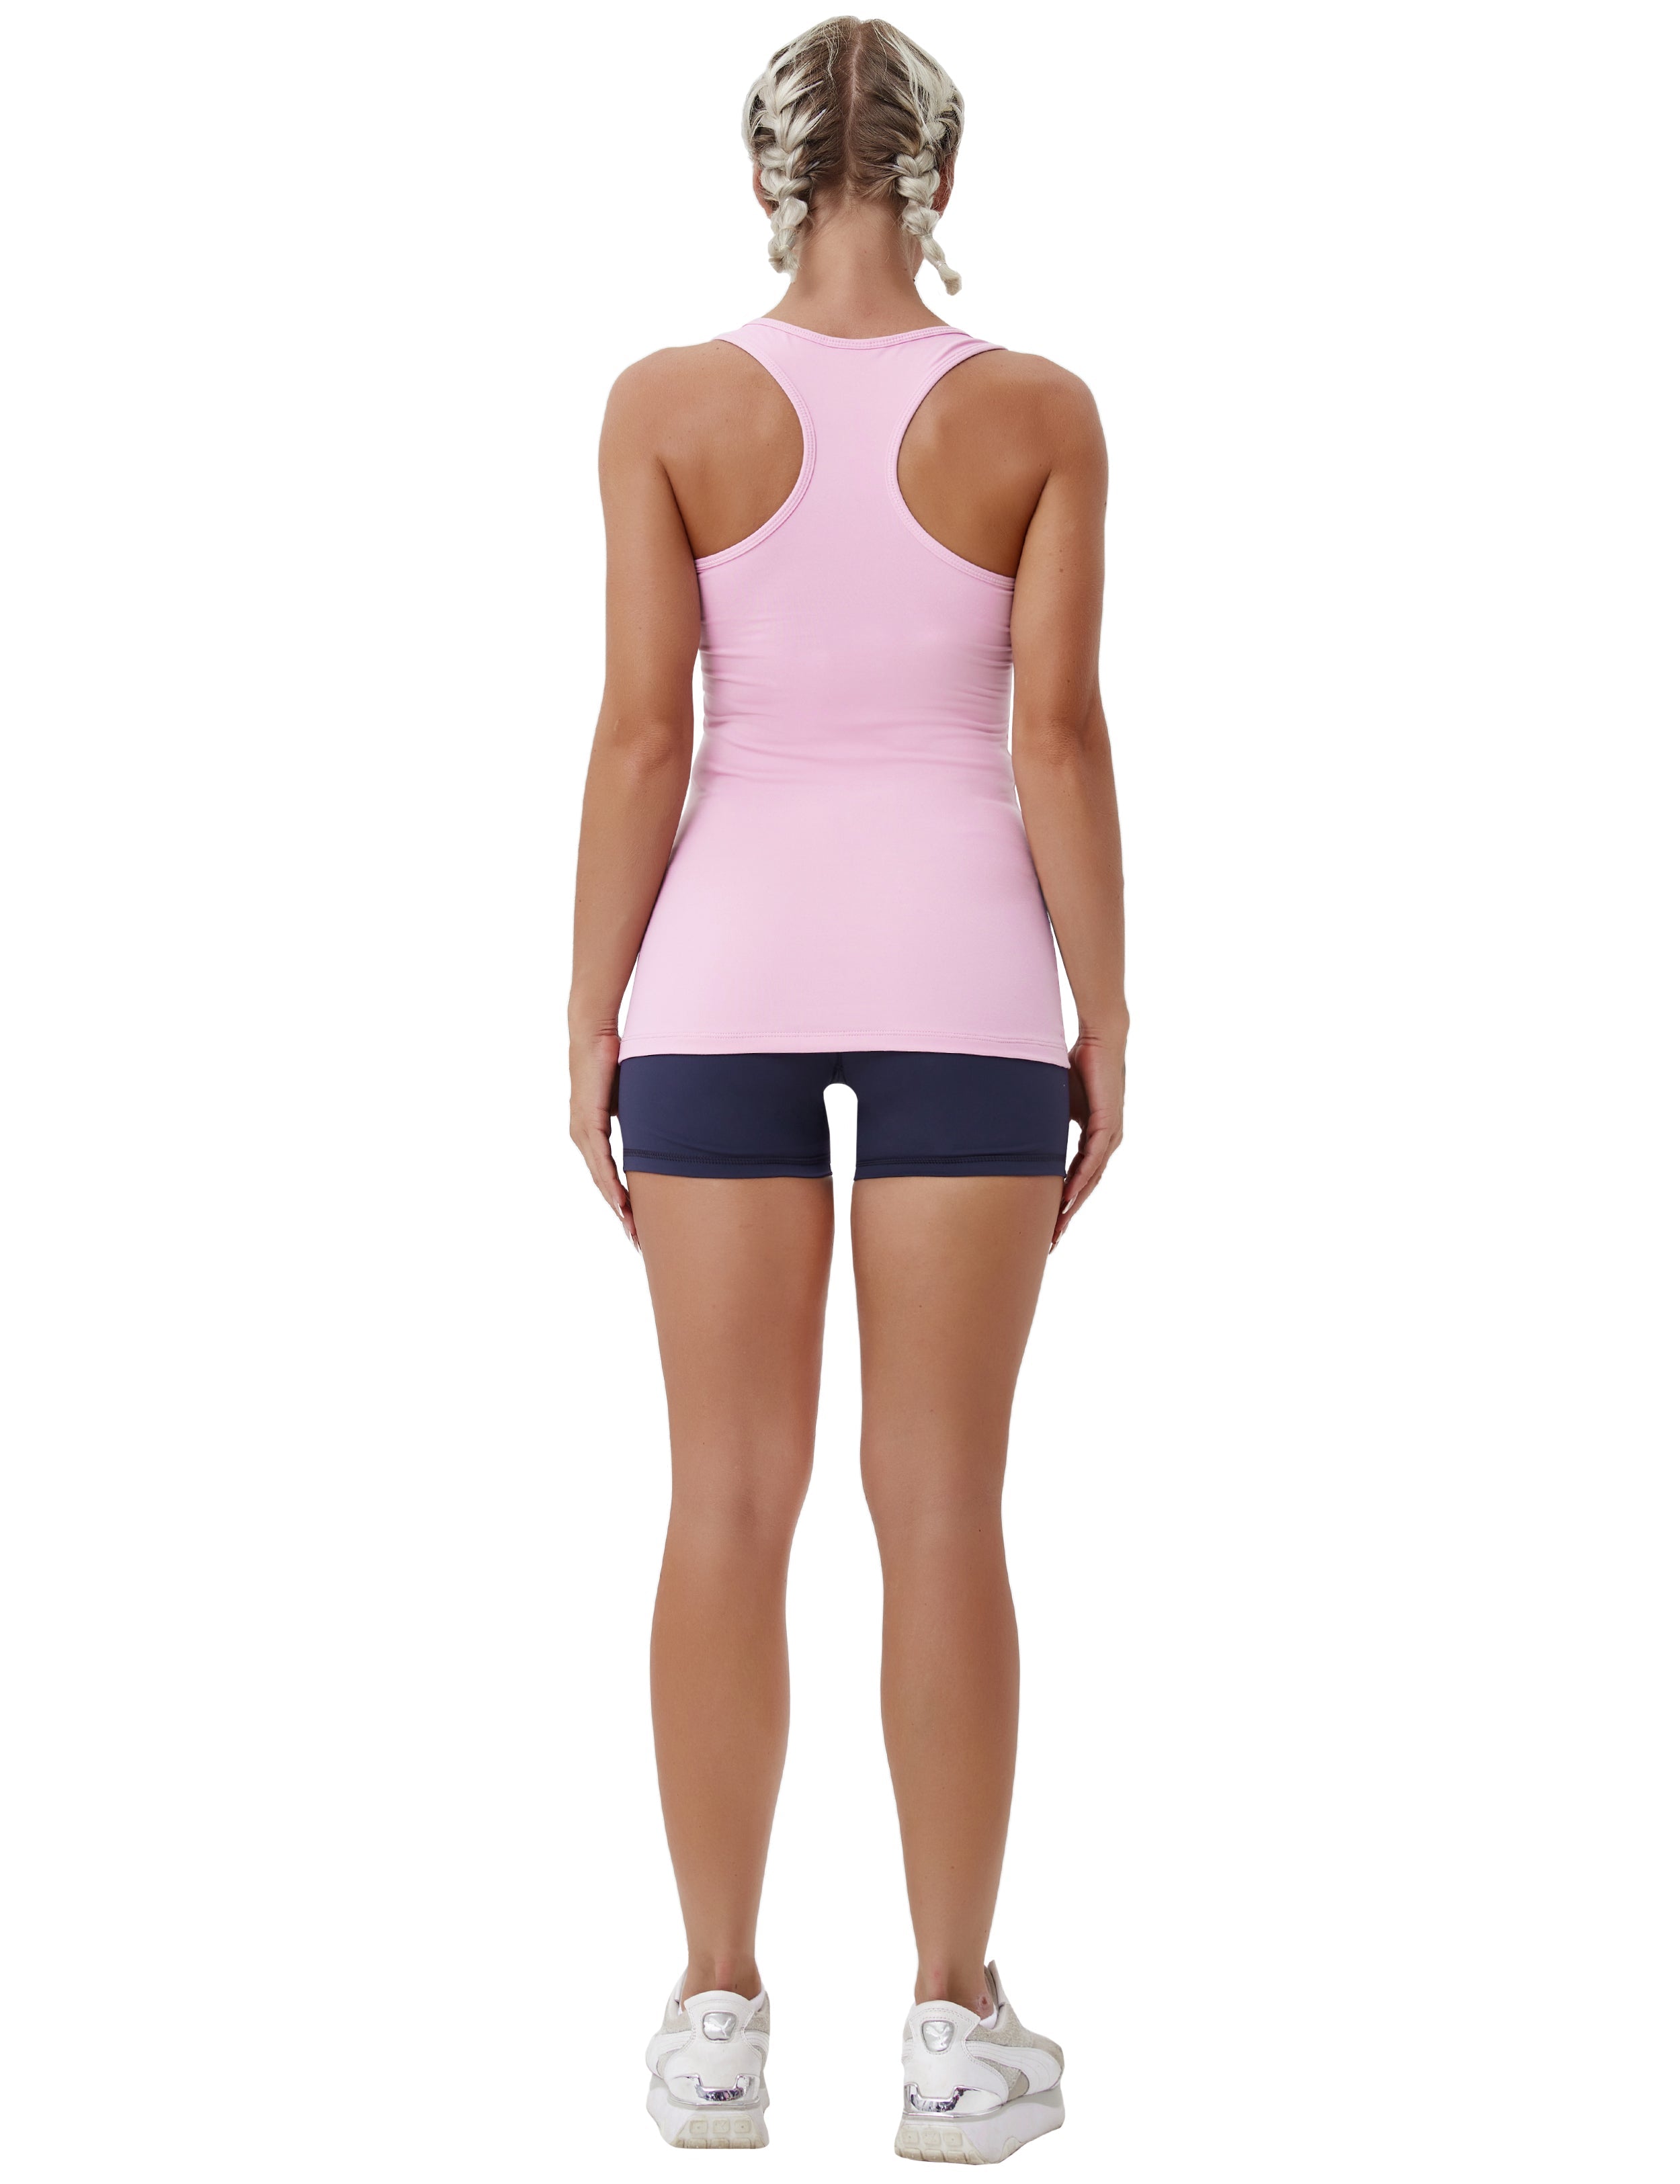 Racerback Athletic Tank Tops lightpink 92%Nylon/8%Spandex(Cotton Soft) Designed for Jogging Tight Fit So buttery soft, it feels weightless Sweat-wicking Four-way stretch Breathable Contours your body Sits below the waistband for moderate, everyday coverage